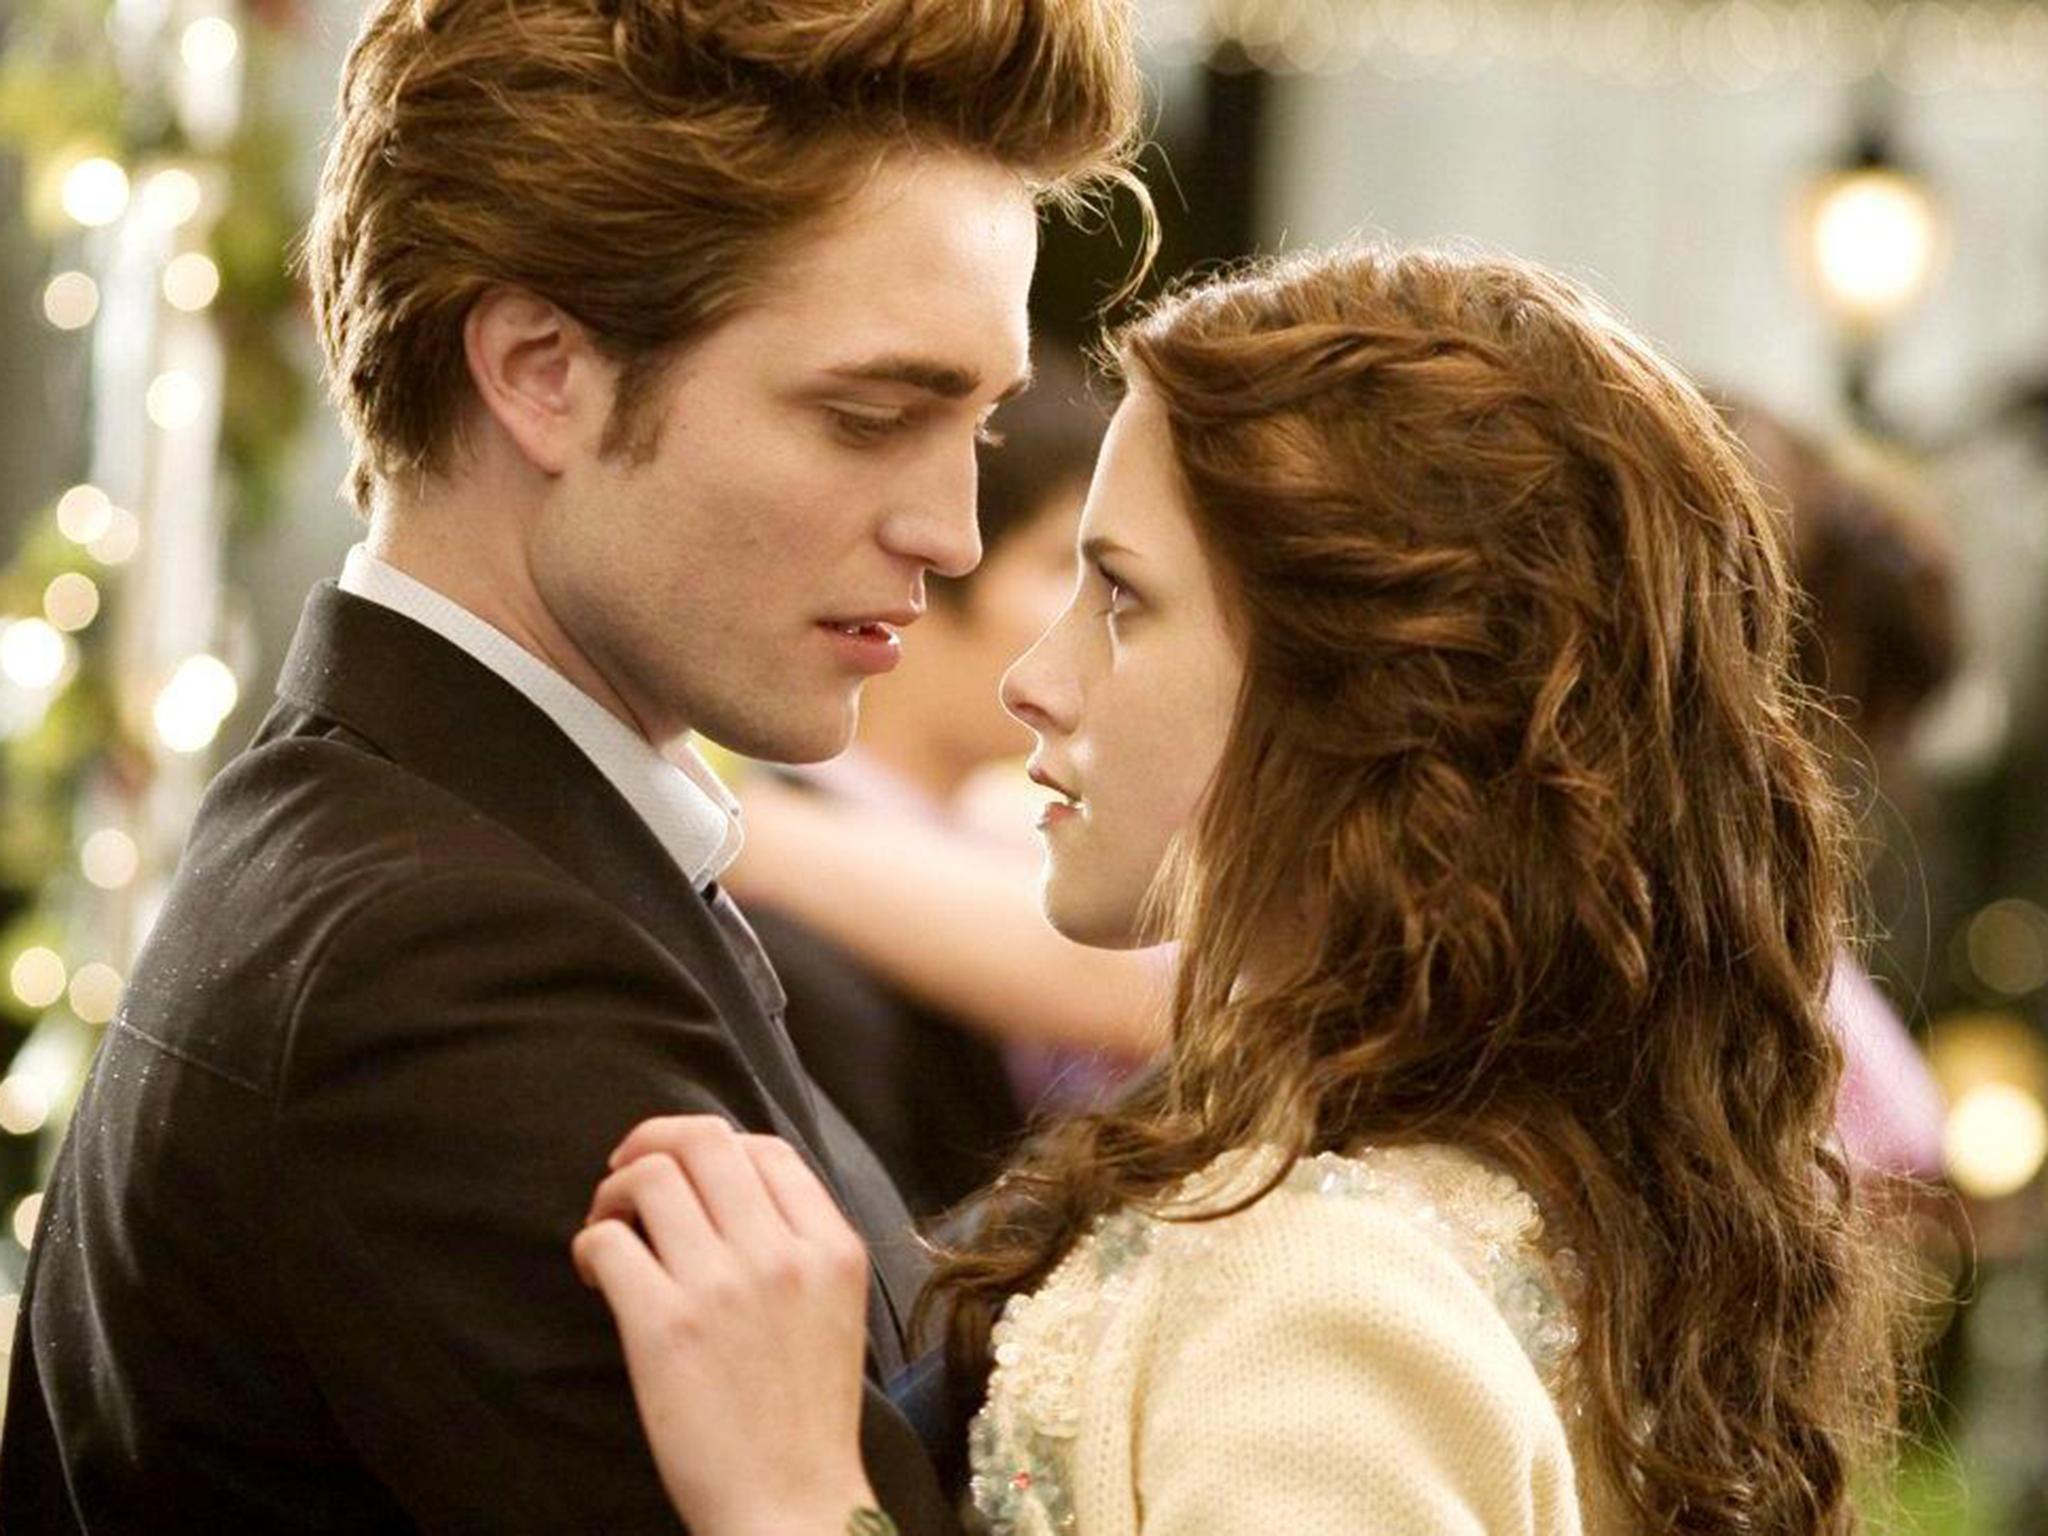 ‘Stephanie Meyer has a lot to answer for.’ Pictured: Robert Pattinson and Kristen Stewart in Twilight